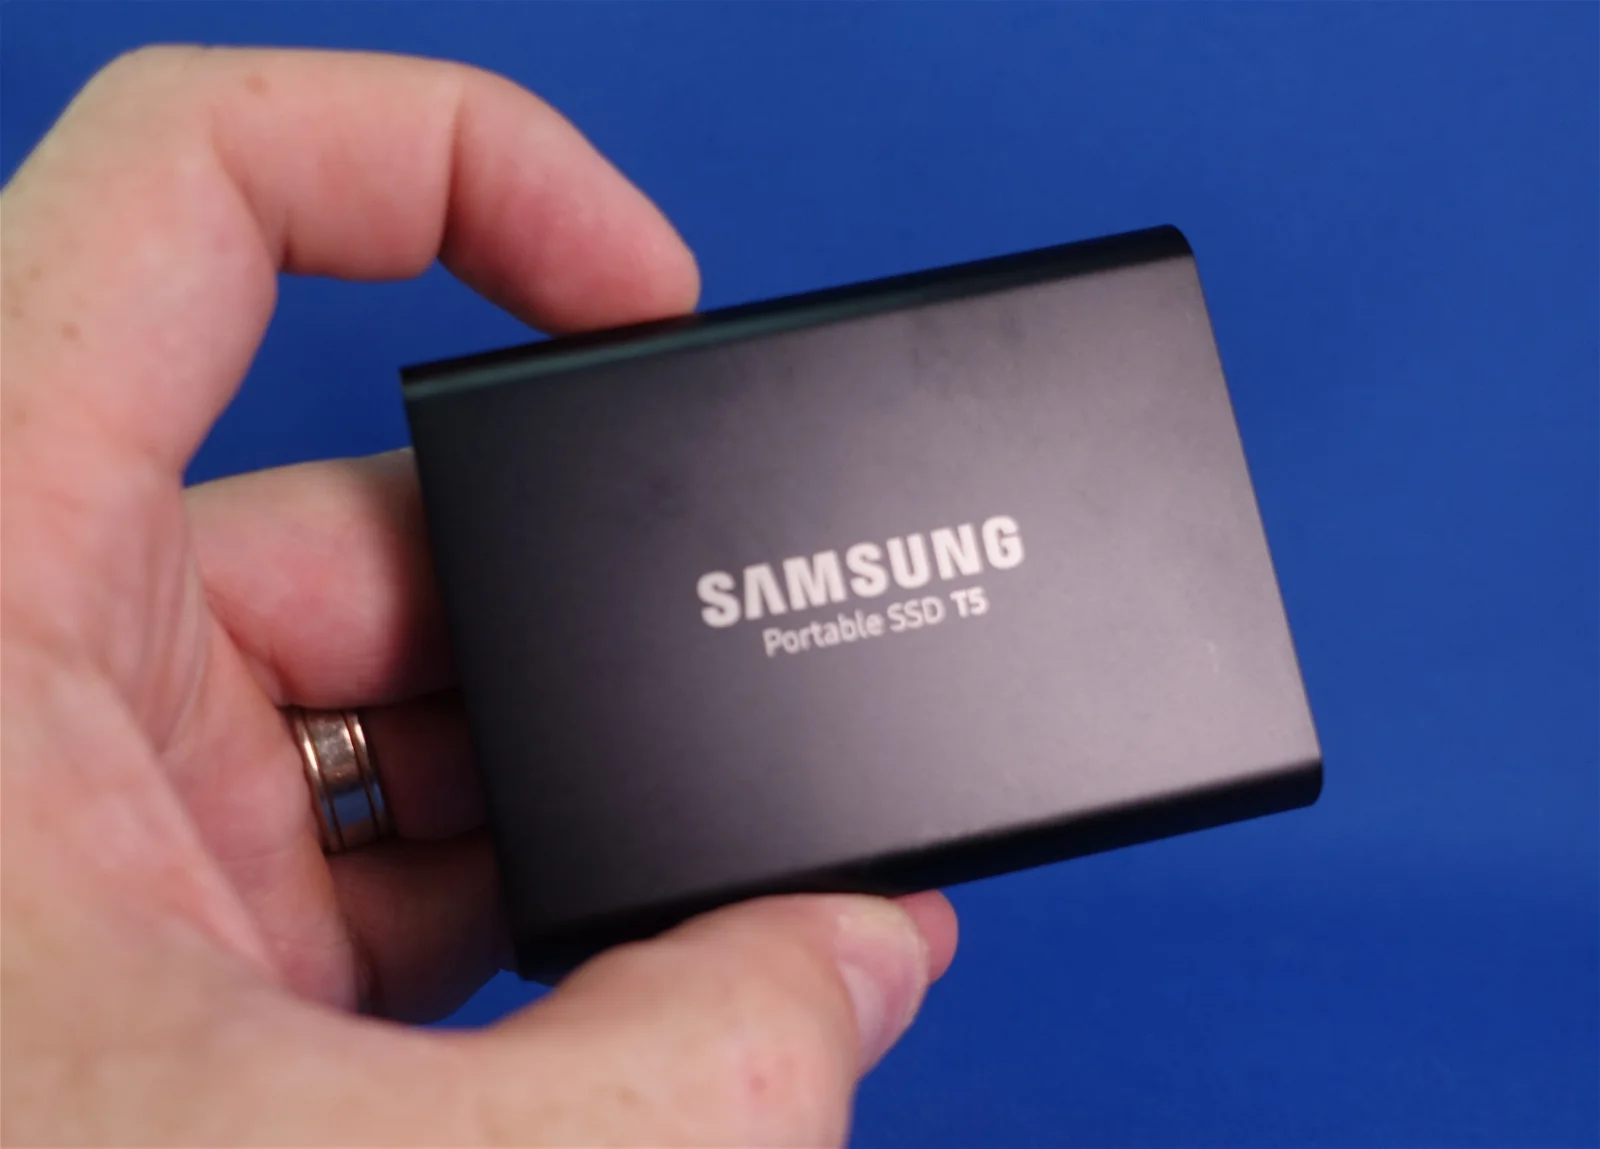 How To Use The Samsung Portable SSD T5